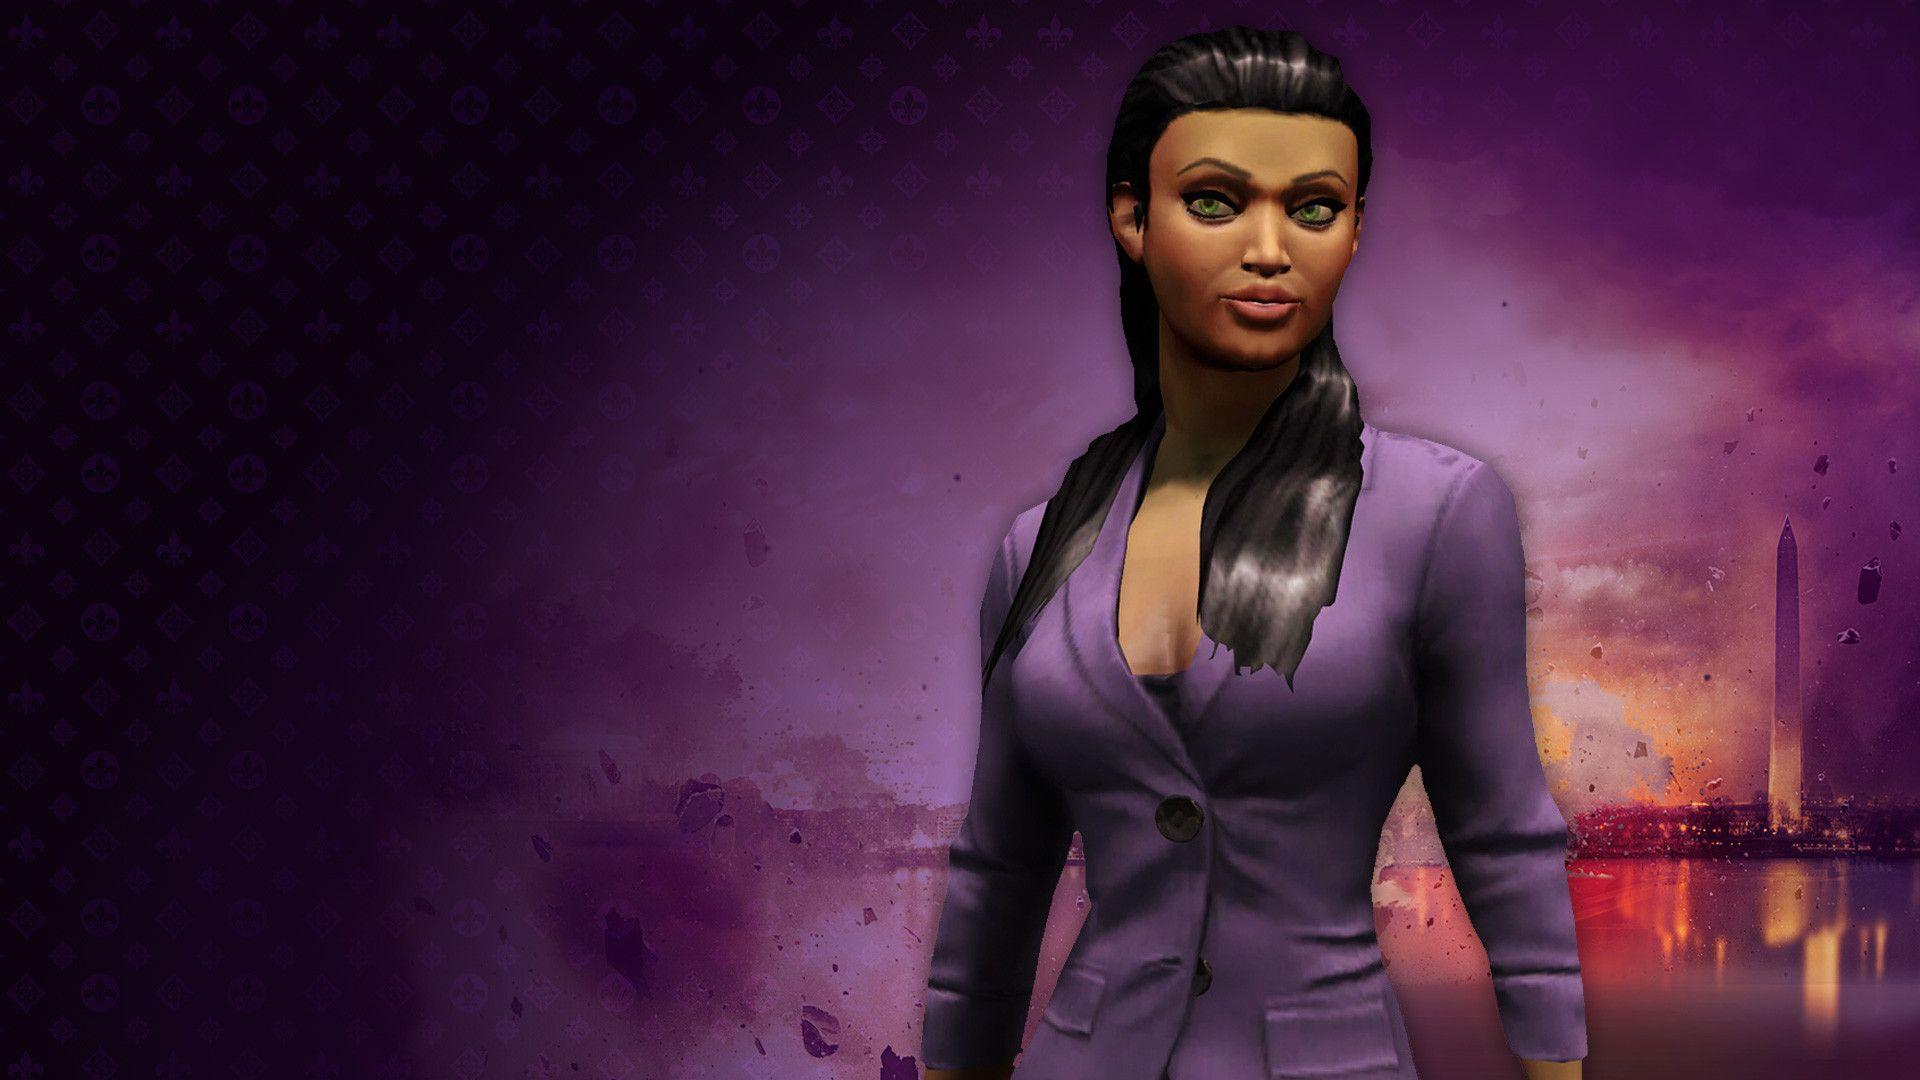 Does anybody fancy some Saints Row IV wallpaper?